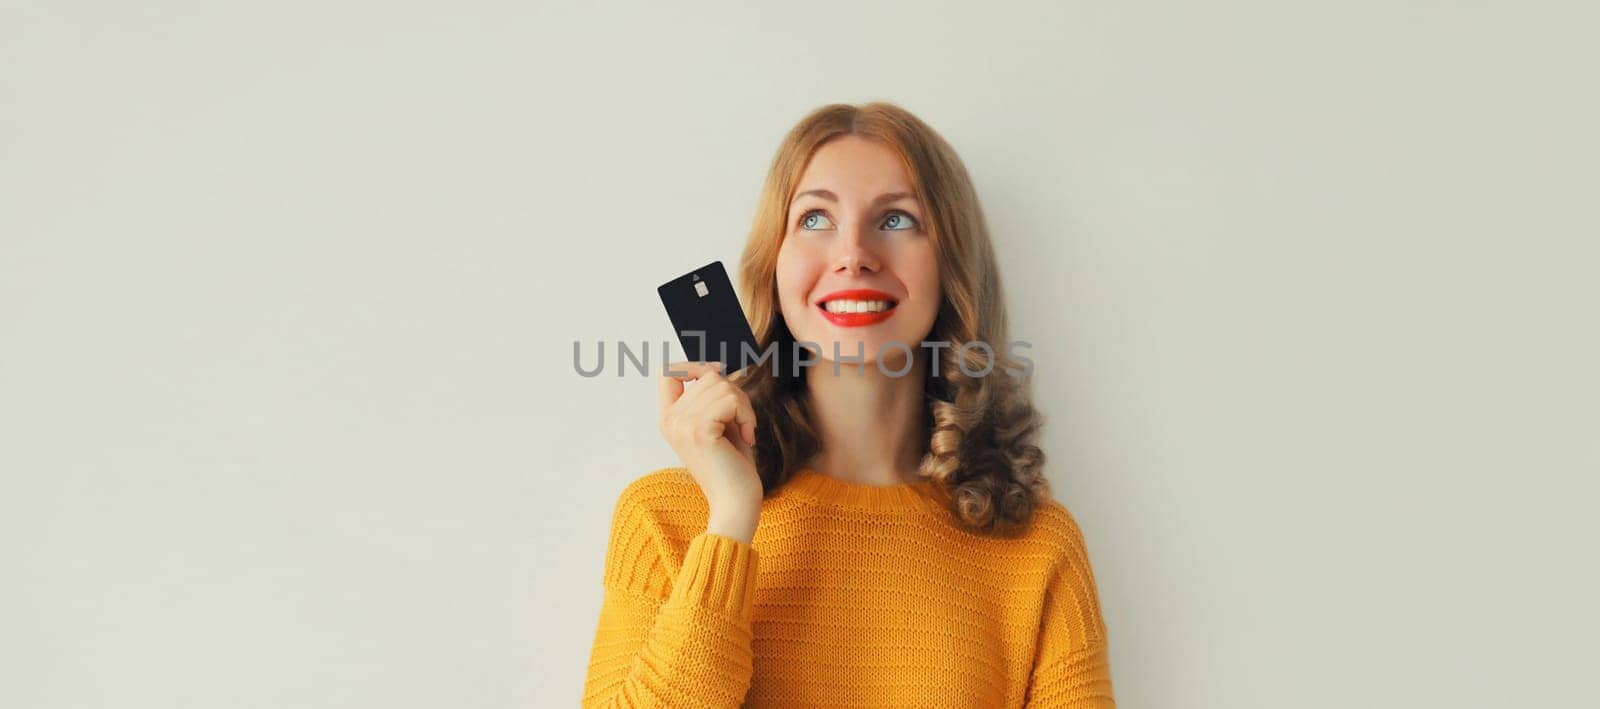 Portrait of happy smiling young woman holding plastic credit bank card and looking up on studio background